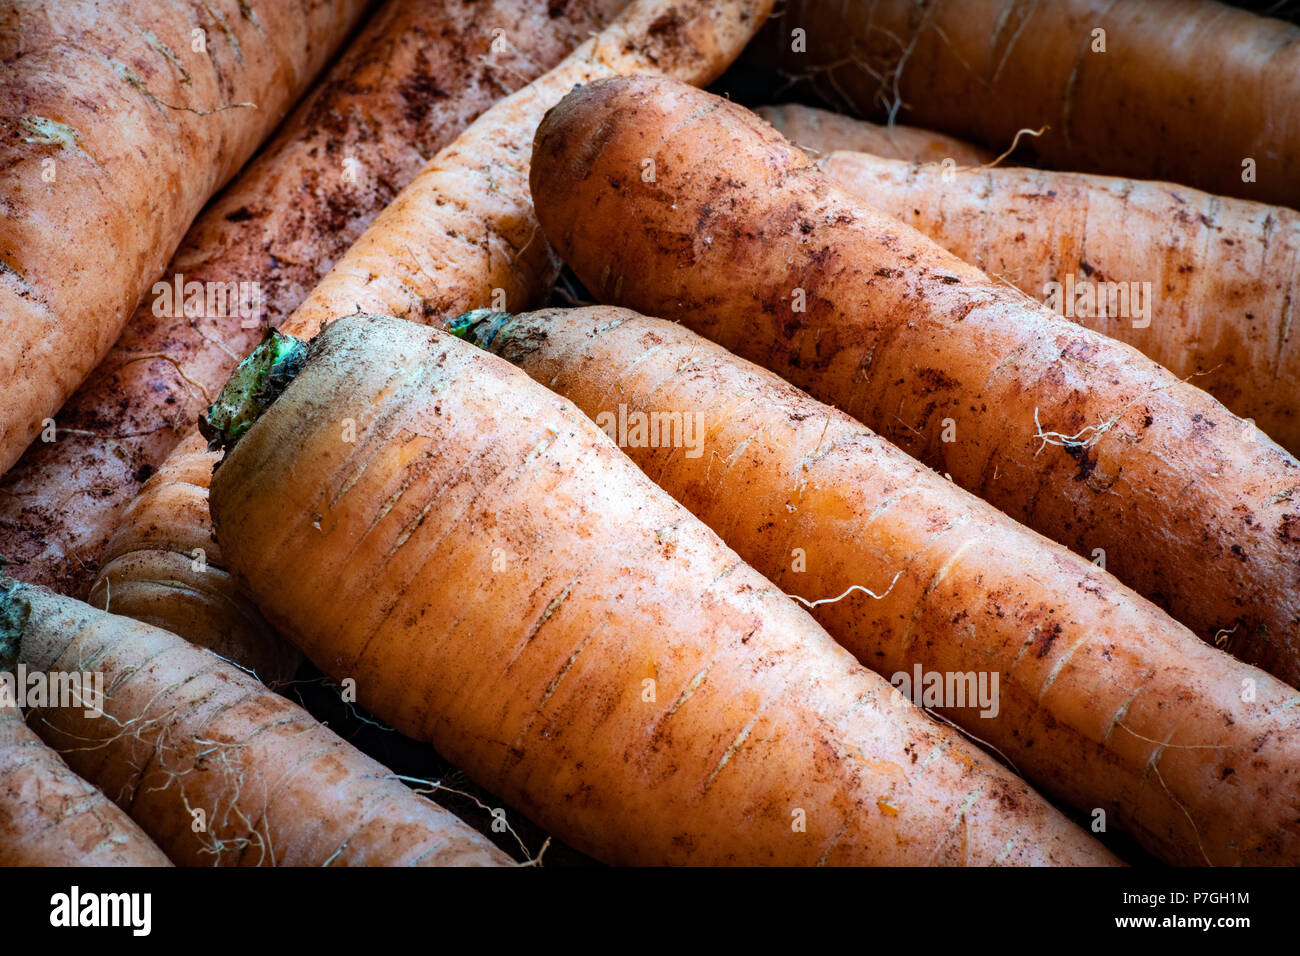 Freshly harvested raw carrots from the field with dirt soil still on and leaves removed. Stock Photo